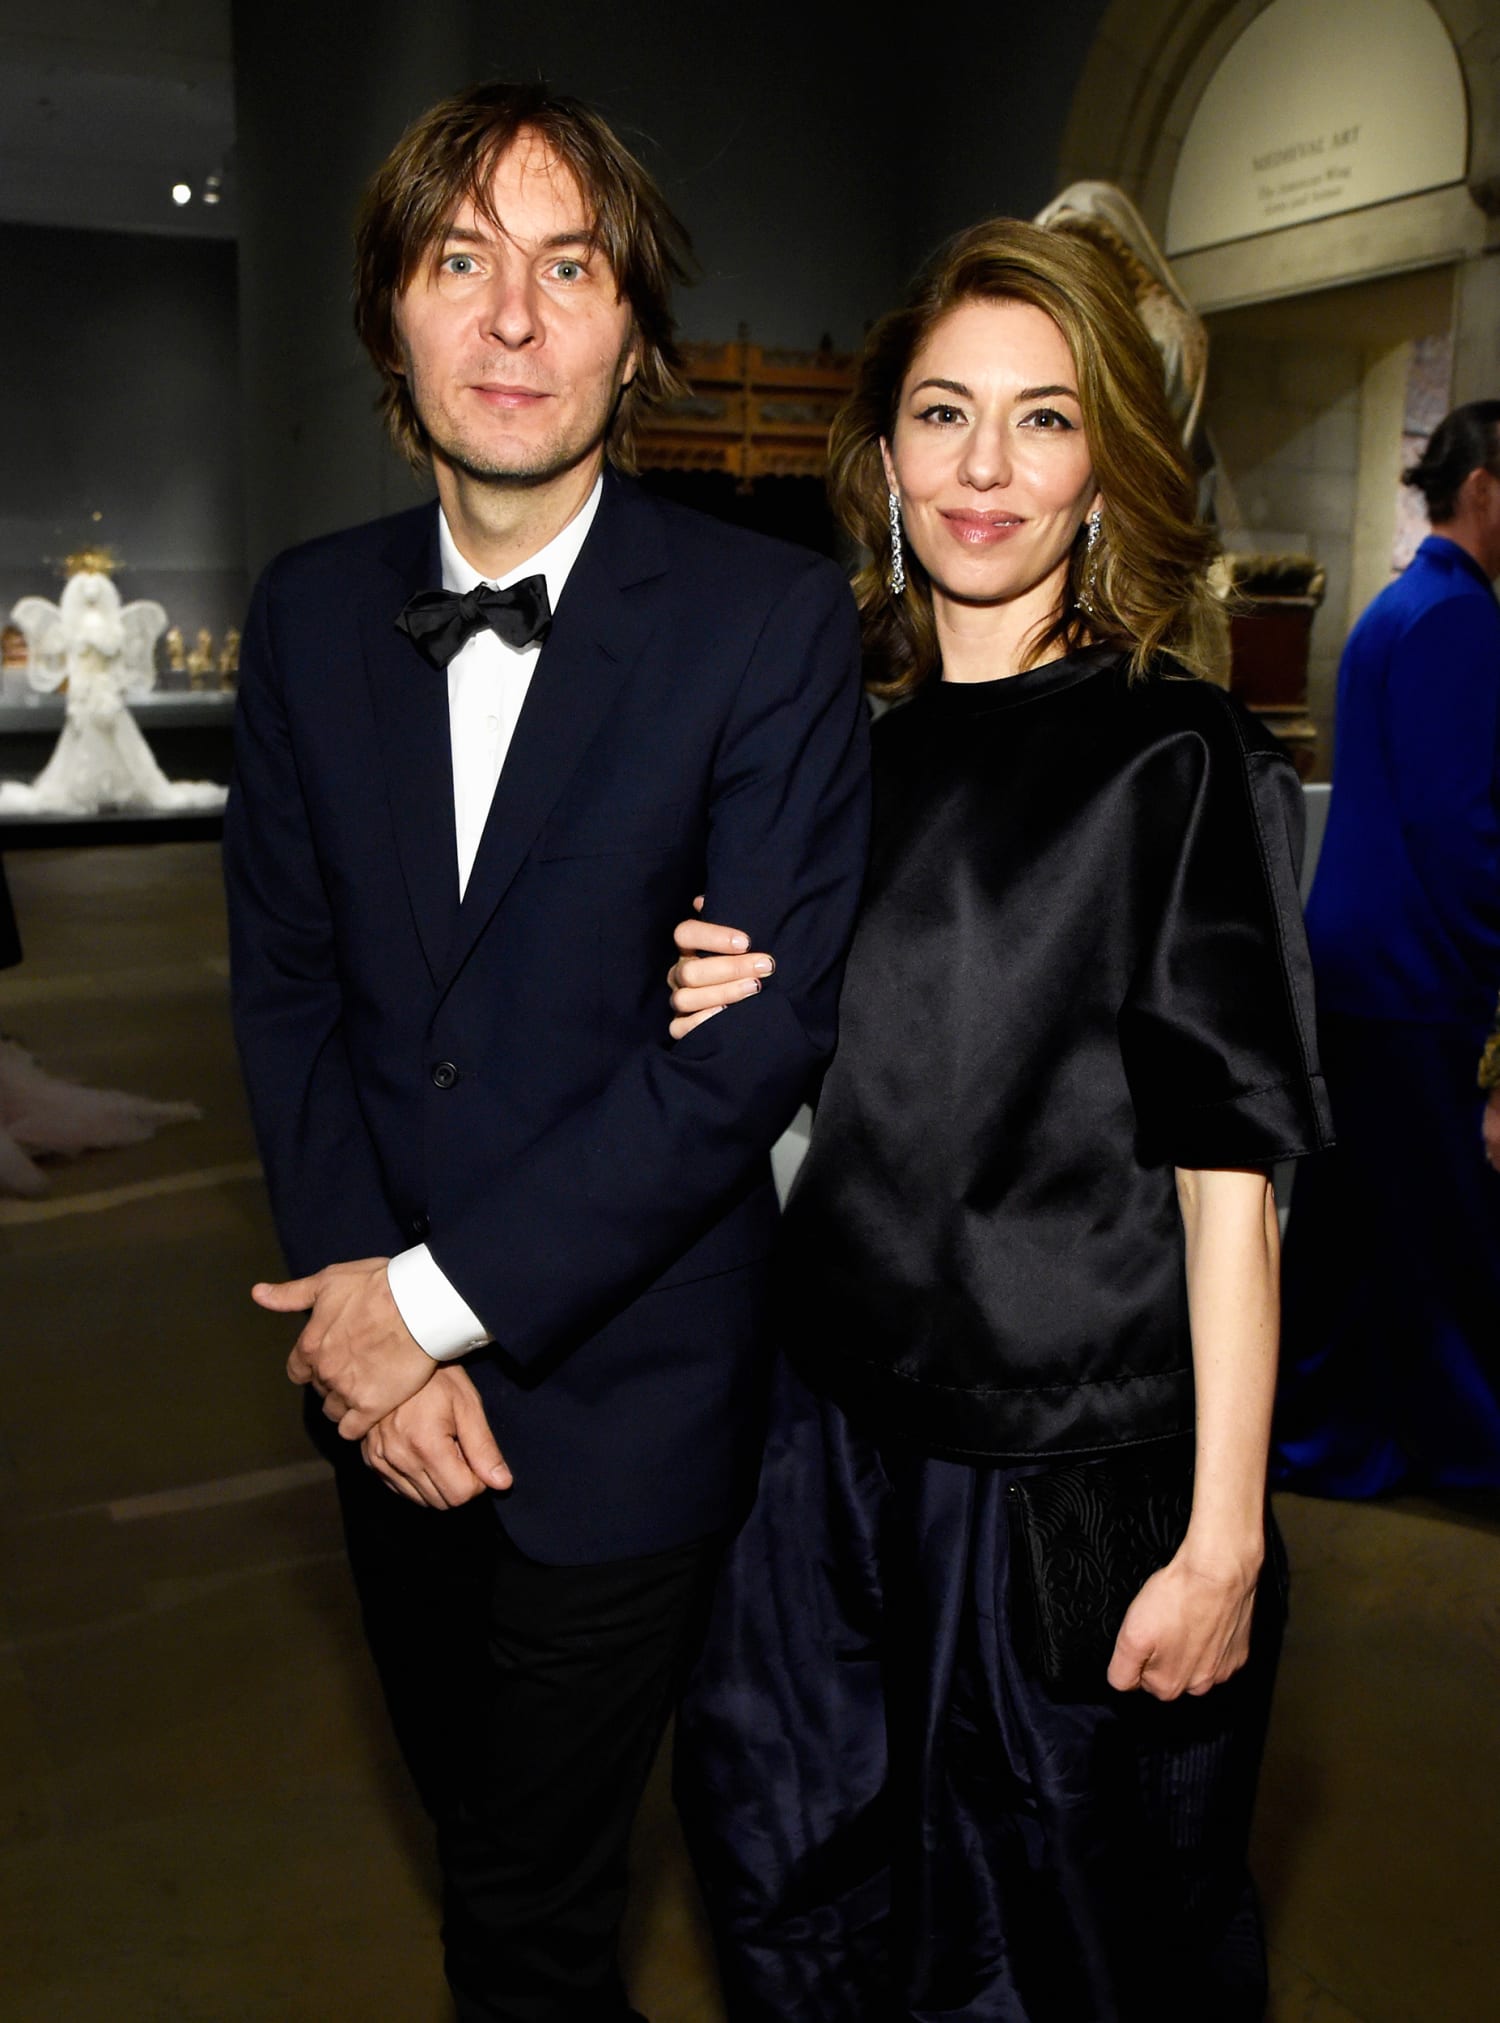 All we know about Sofia Coppola's kids following daughter Romy's